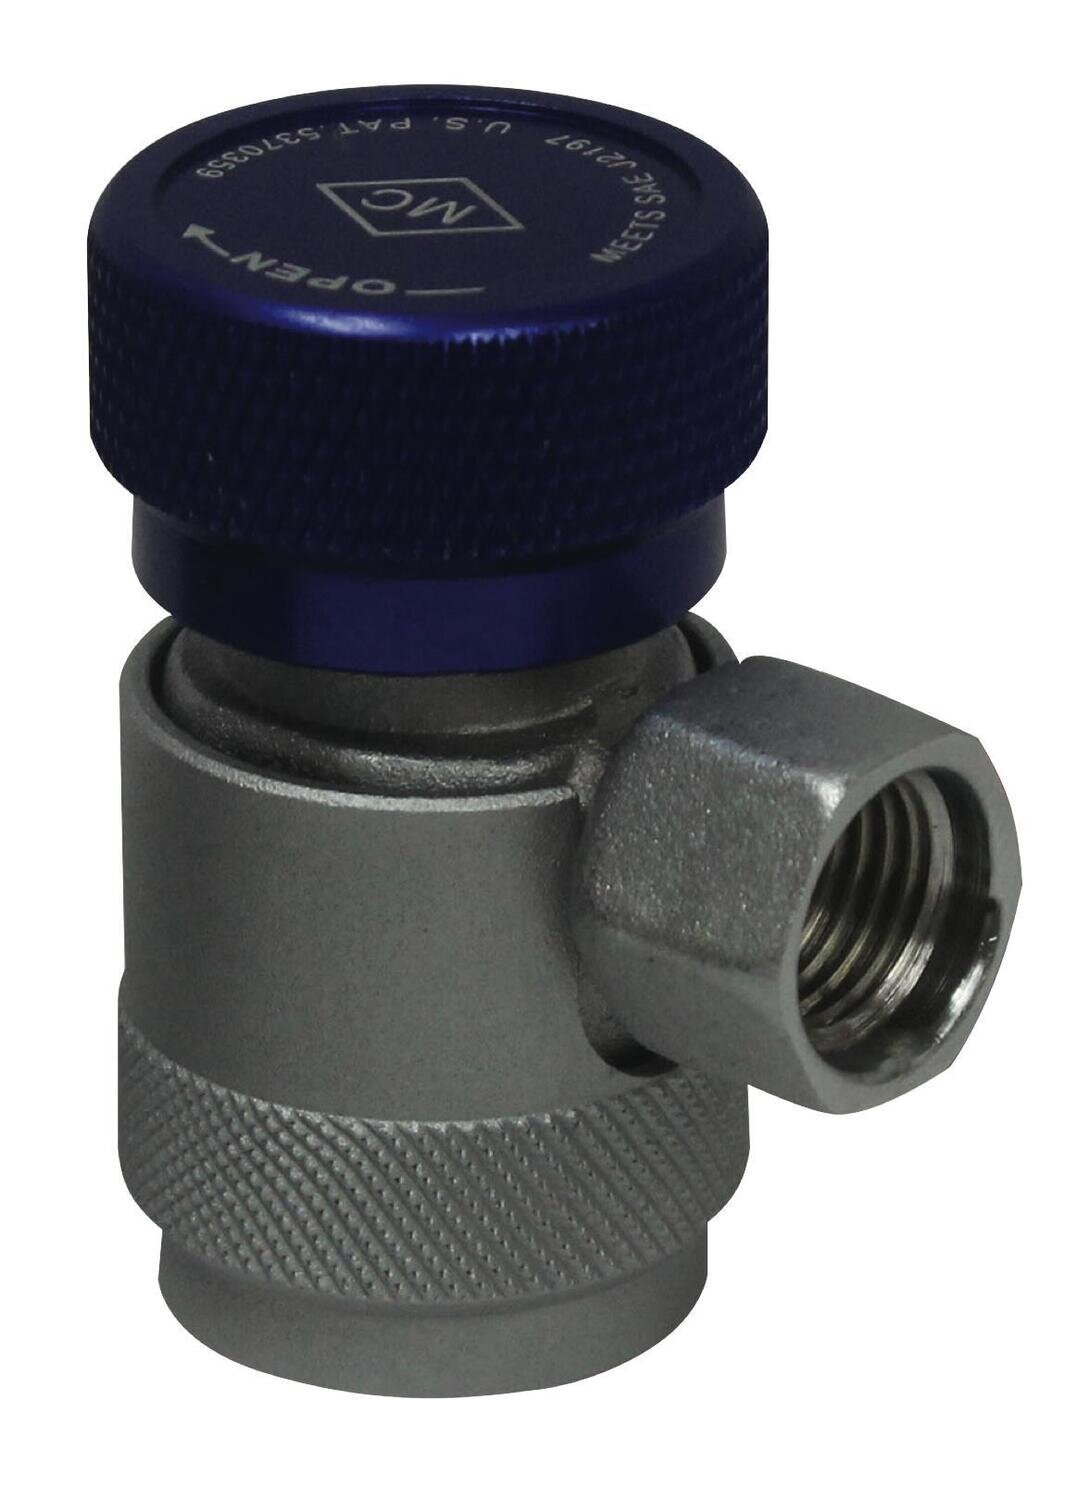 MCL82934SL - R134a Blue Safety-Lock Low Coupler, 14mm-F x 13mm